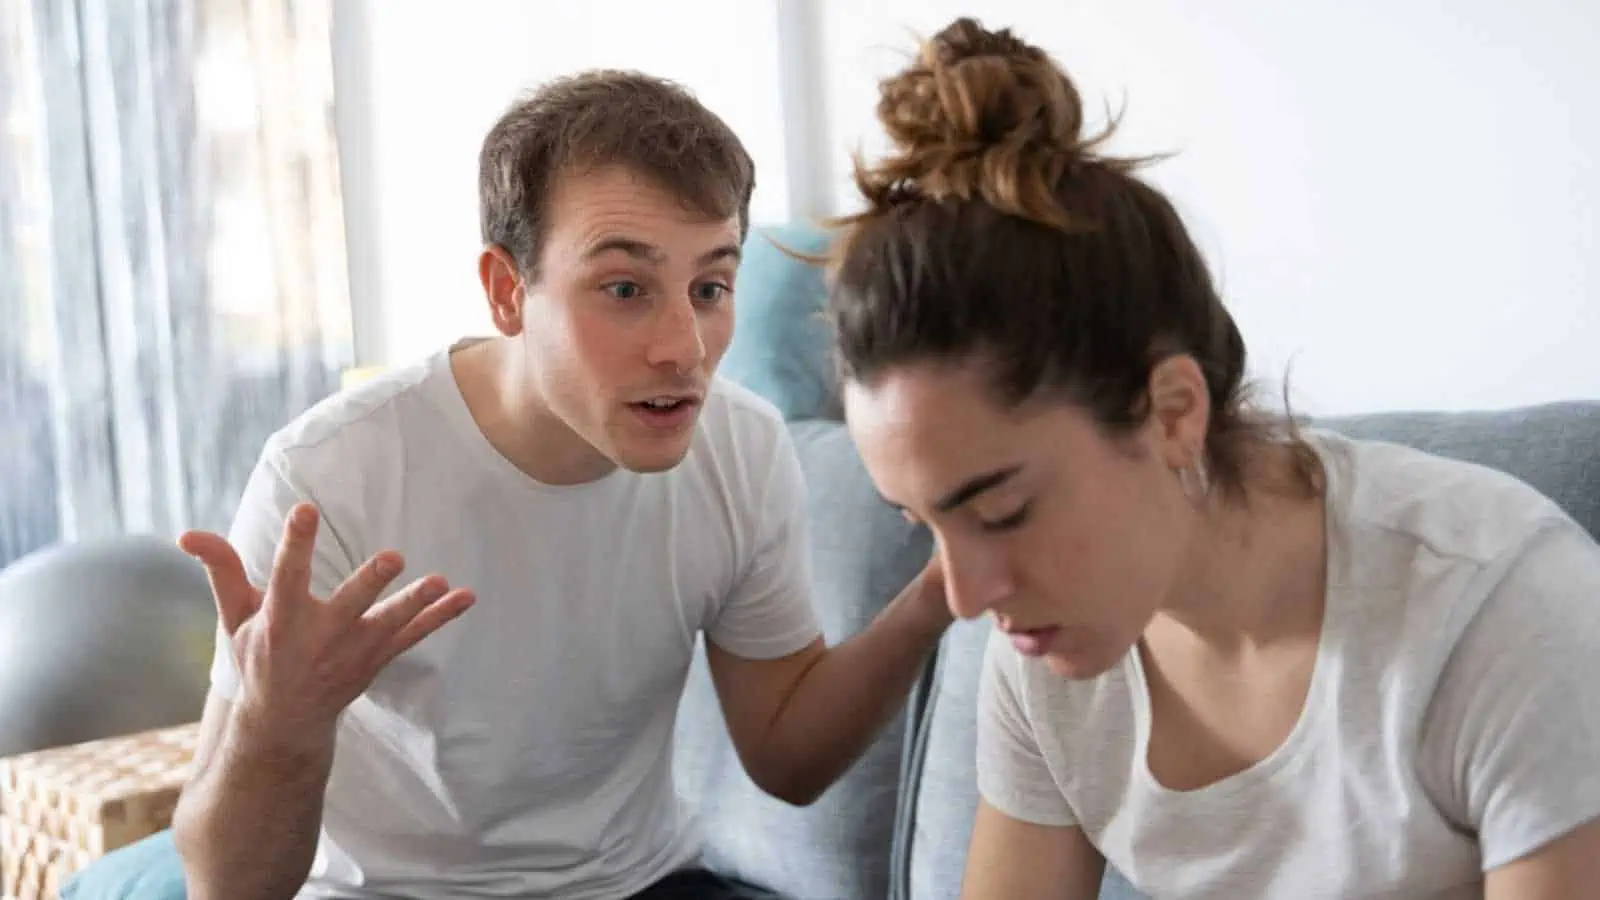 Woman in abusive relationship Shutterstock MSN